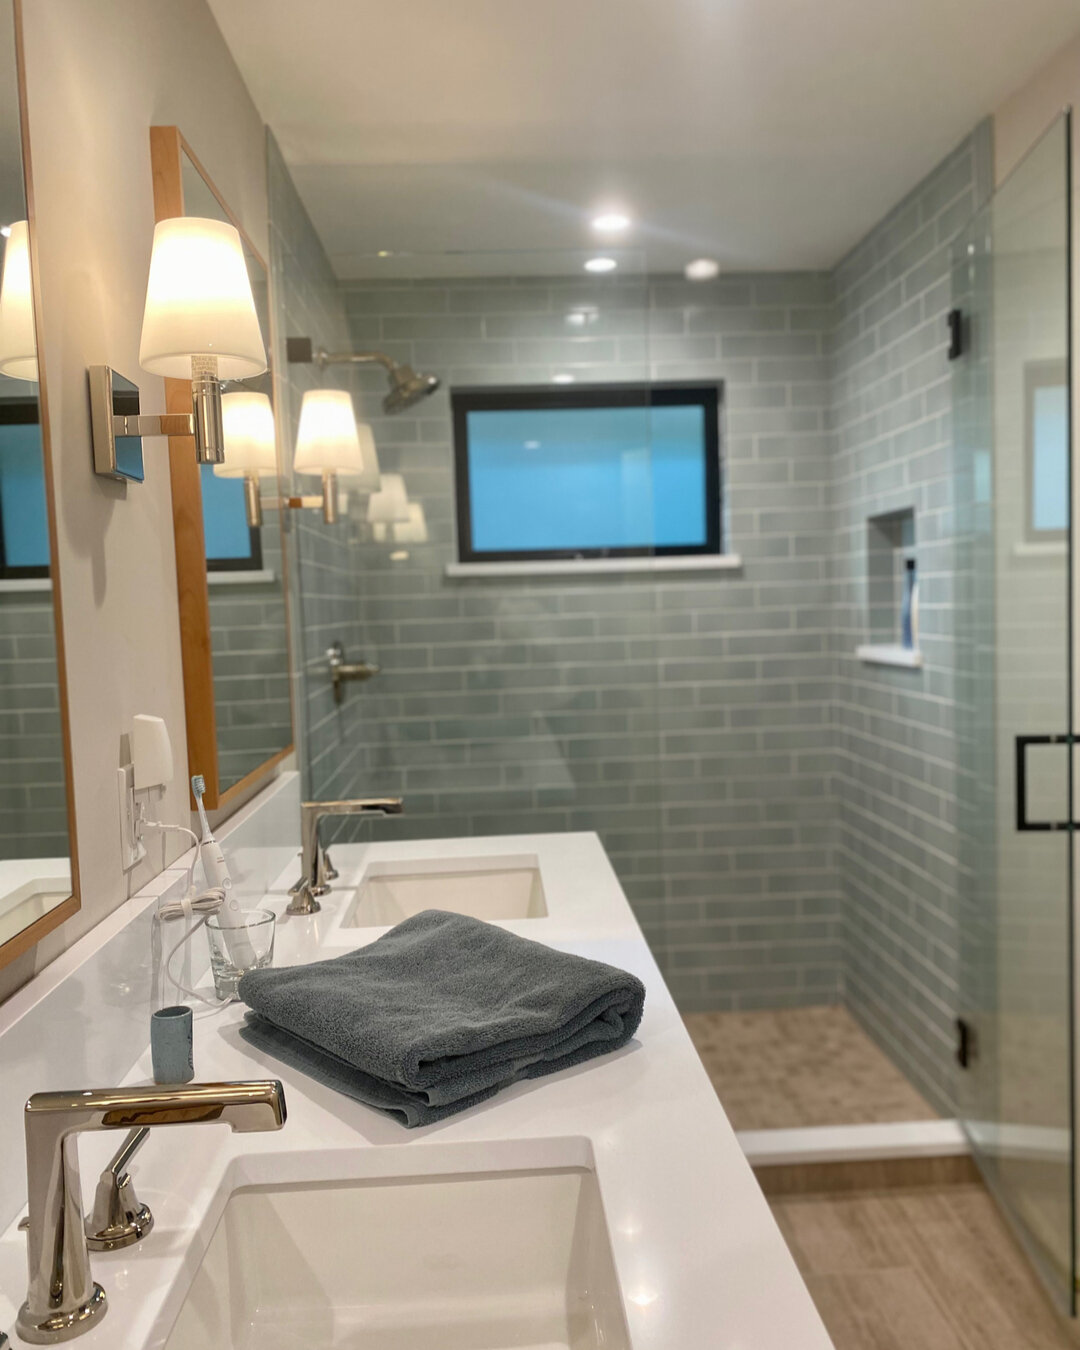 What does your dream bathroom look like? Let Harpole Home help you with the design process. Beautiful materials and playful, elegant color schemes are always a win! ​​​​​​​​​
Design: #HarpoleHomeProjects
Tile: @fireclay Salton Sea
Hardware: brizo #Ha